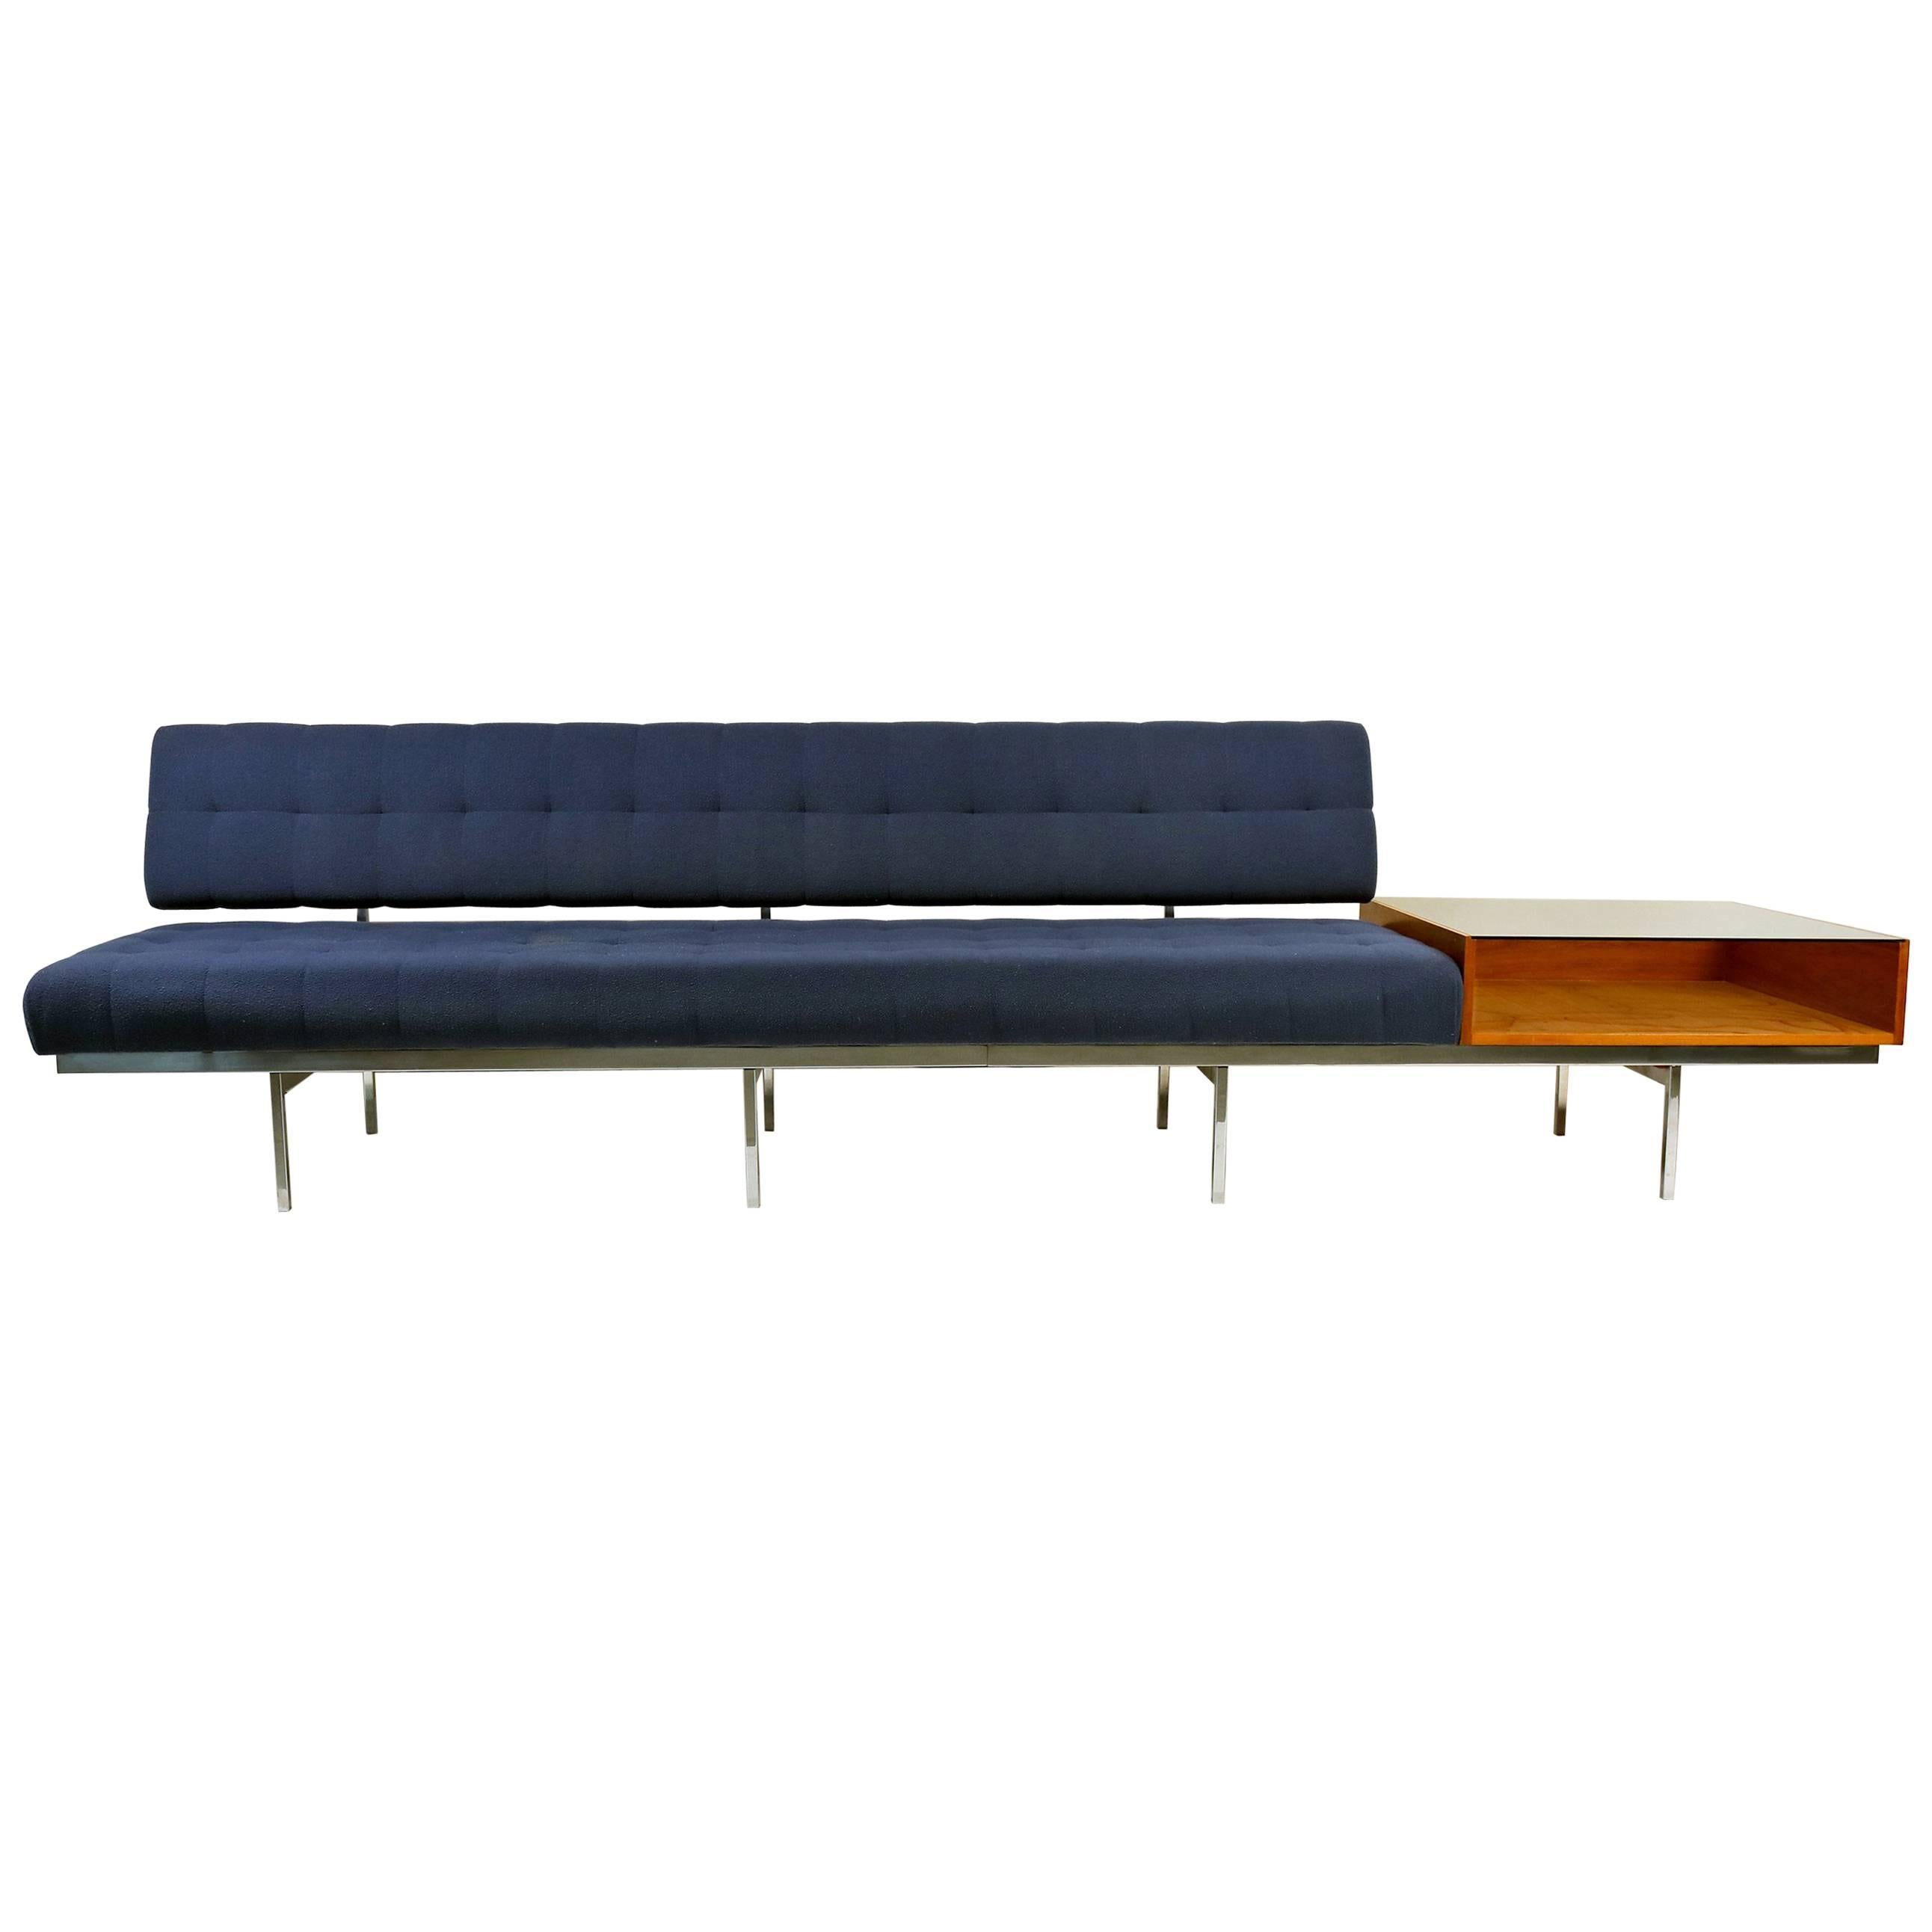 Architectural Florence Knoll Sofa with Table Attachment for Knoll